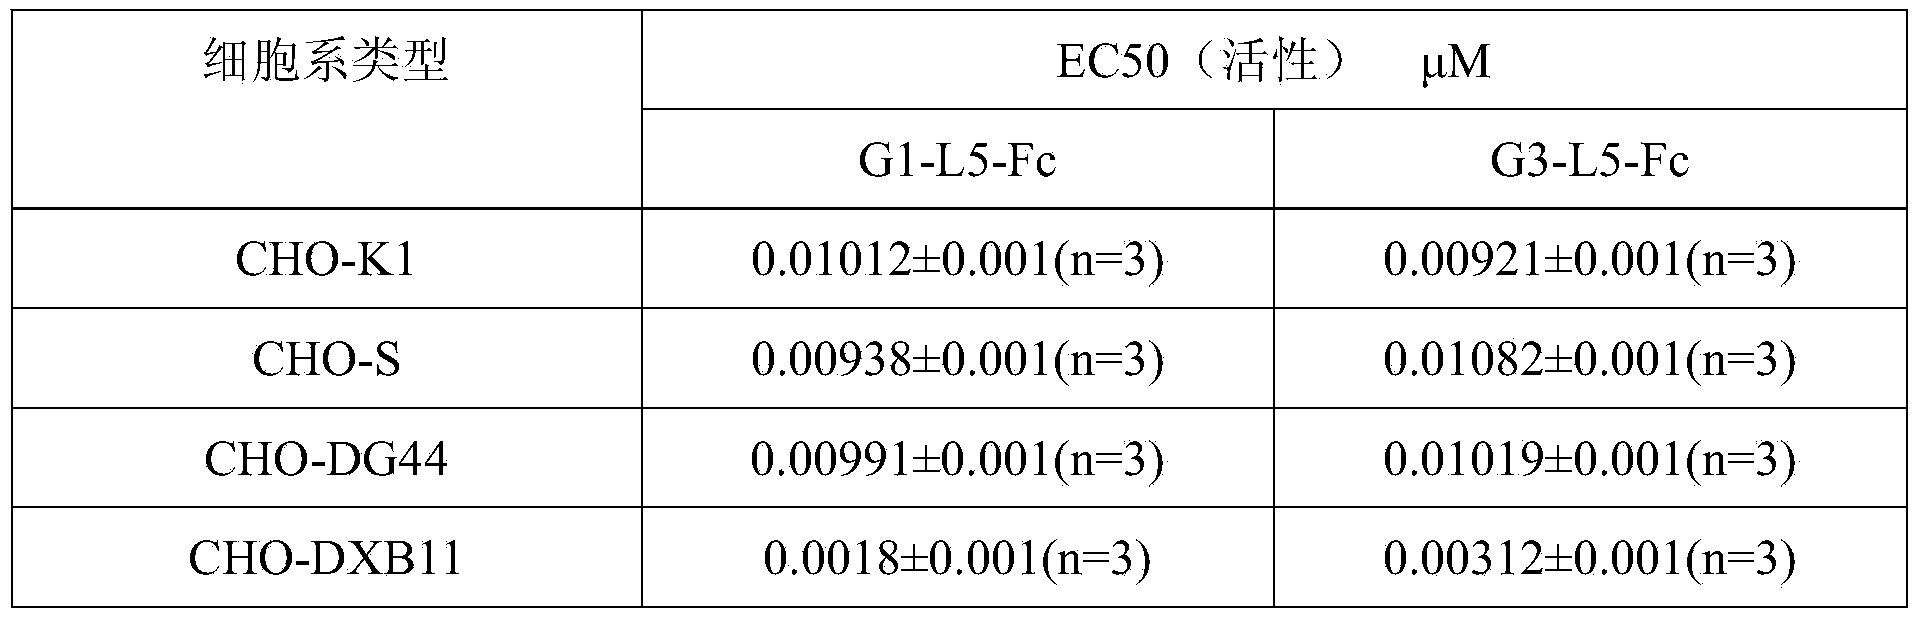 Preparation method of GLP (Glucagon-Like Peptide) -1 or analogue thereof and antibody Fc fragment fusion protein